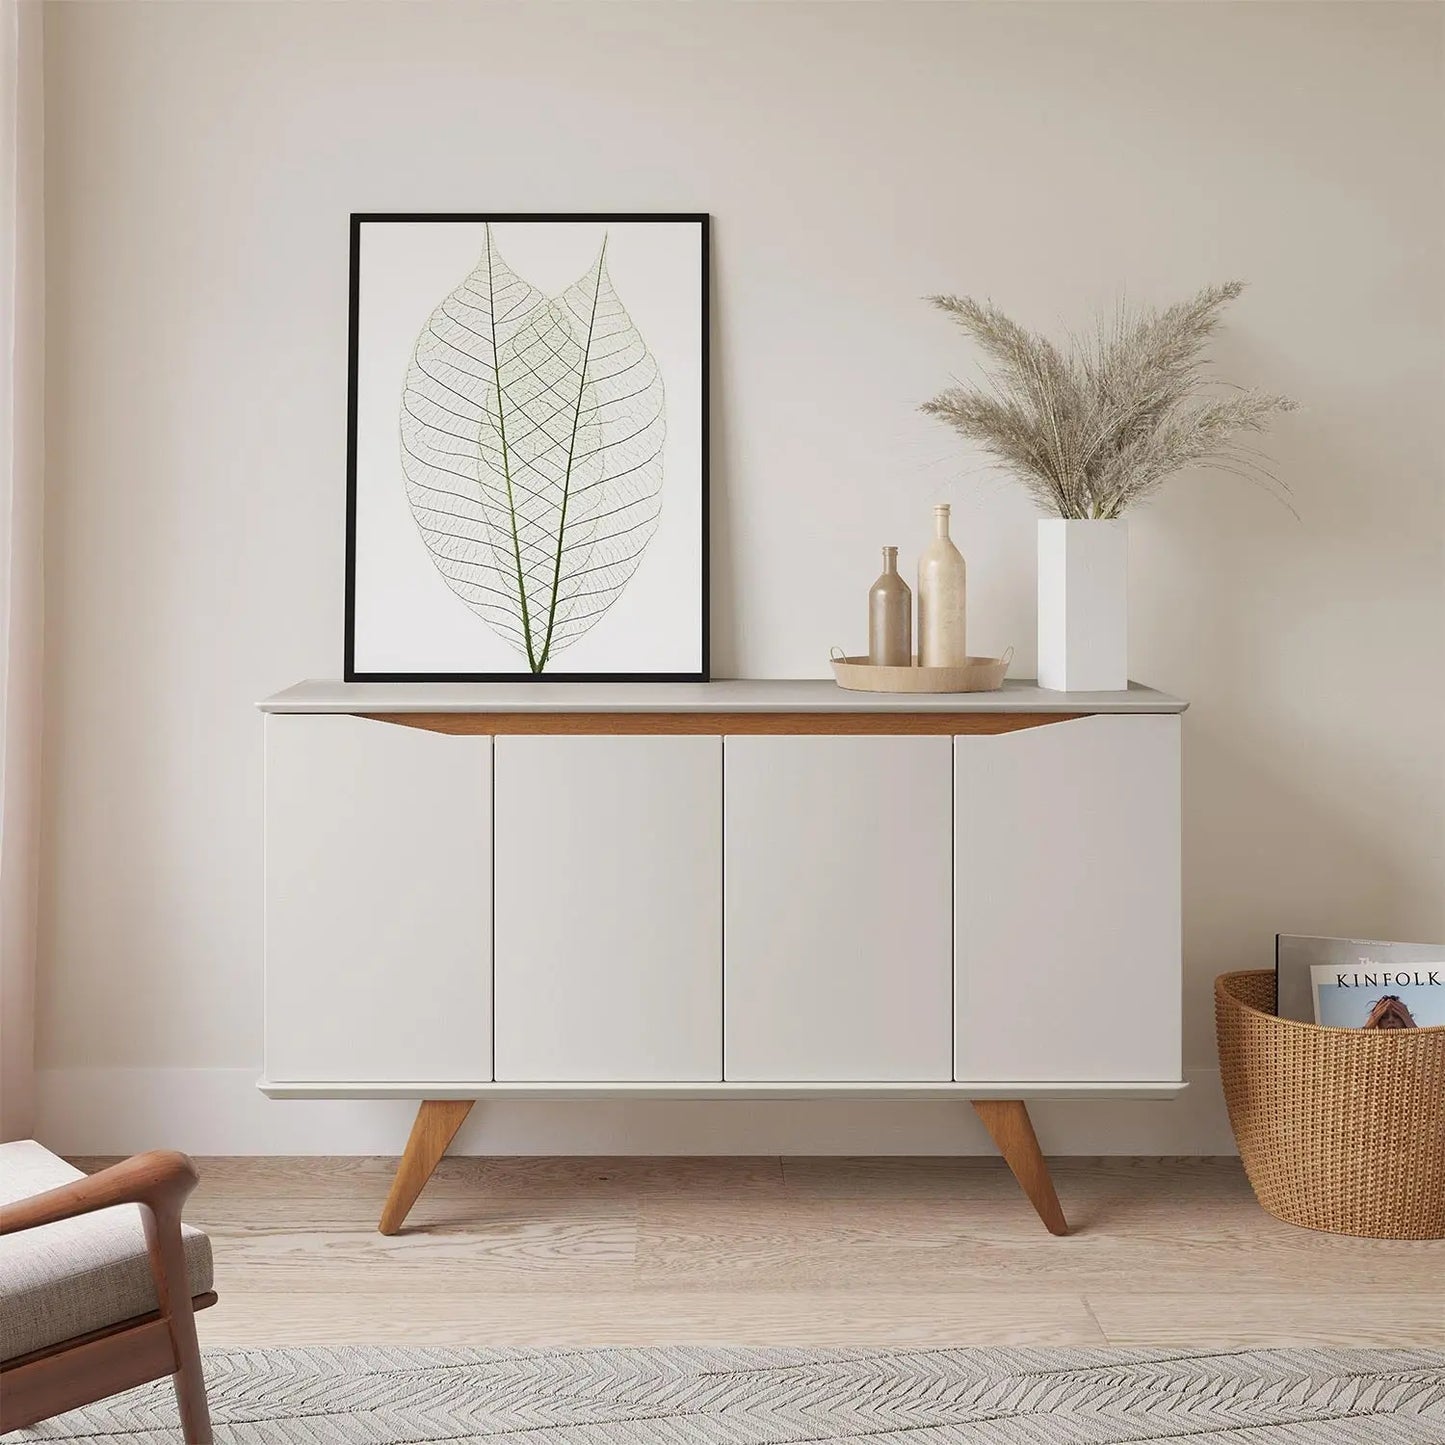 Homedock Buffet Olive 135 cm - Off White Fosco c/ Natural Moveis